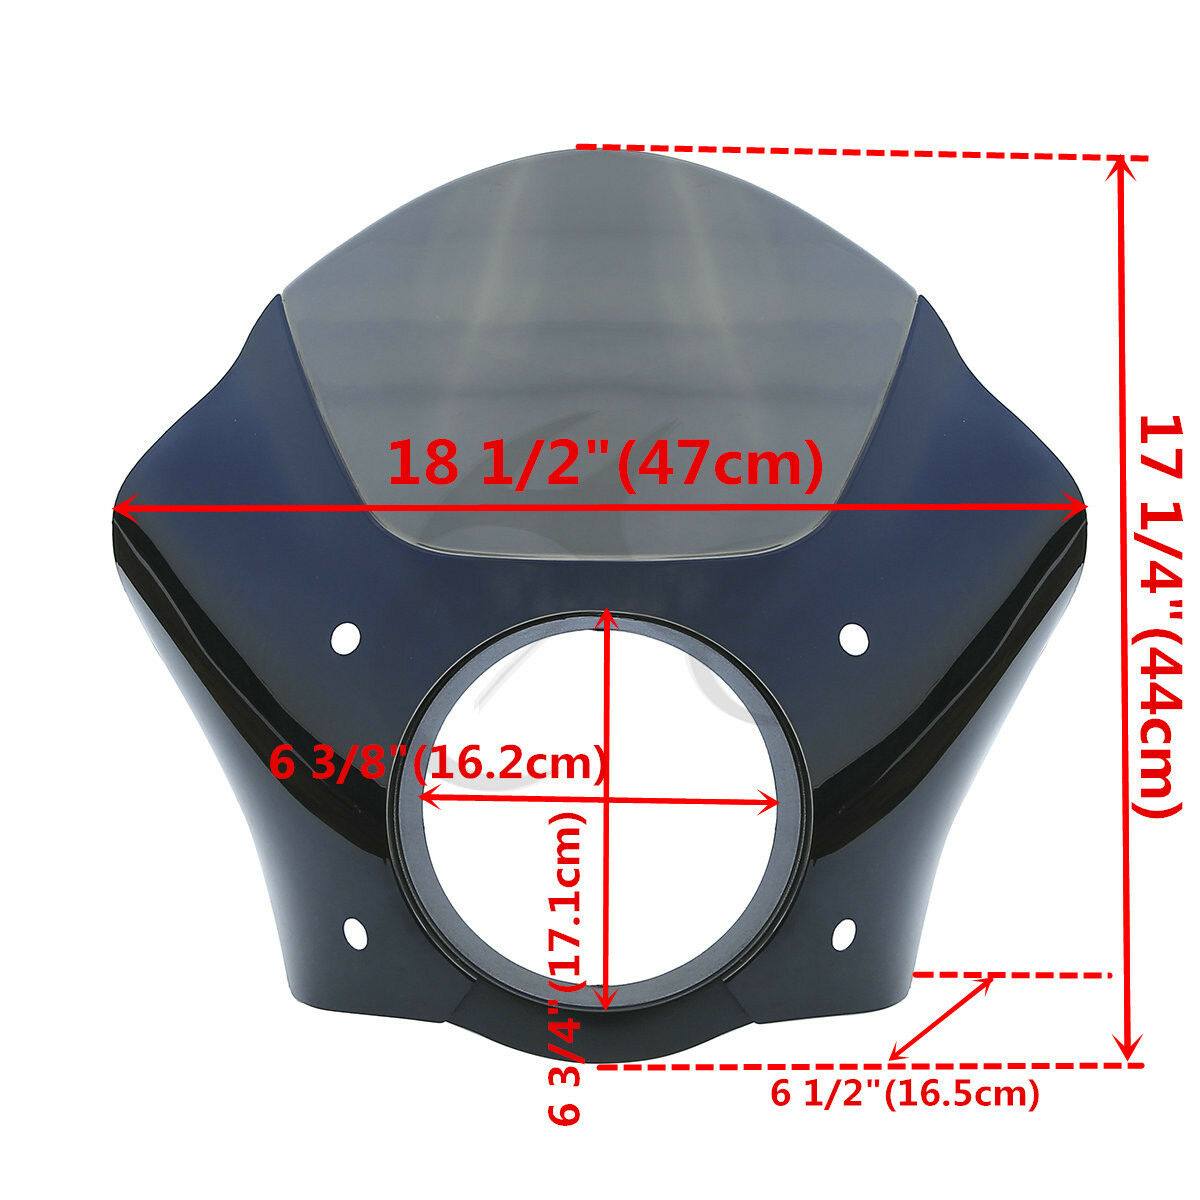 Black Gauntlet Headlight Fairing Mask Fit For Harley Sportster XL 883 1986-2014 - Moto Life Products